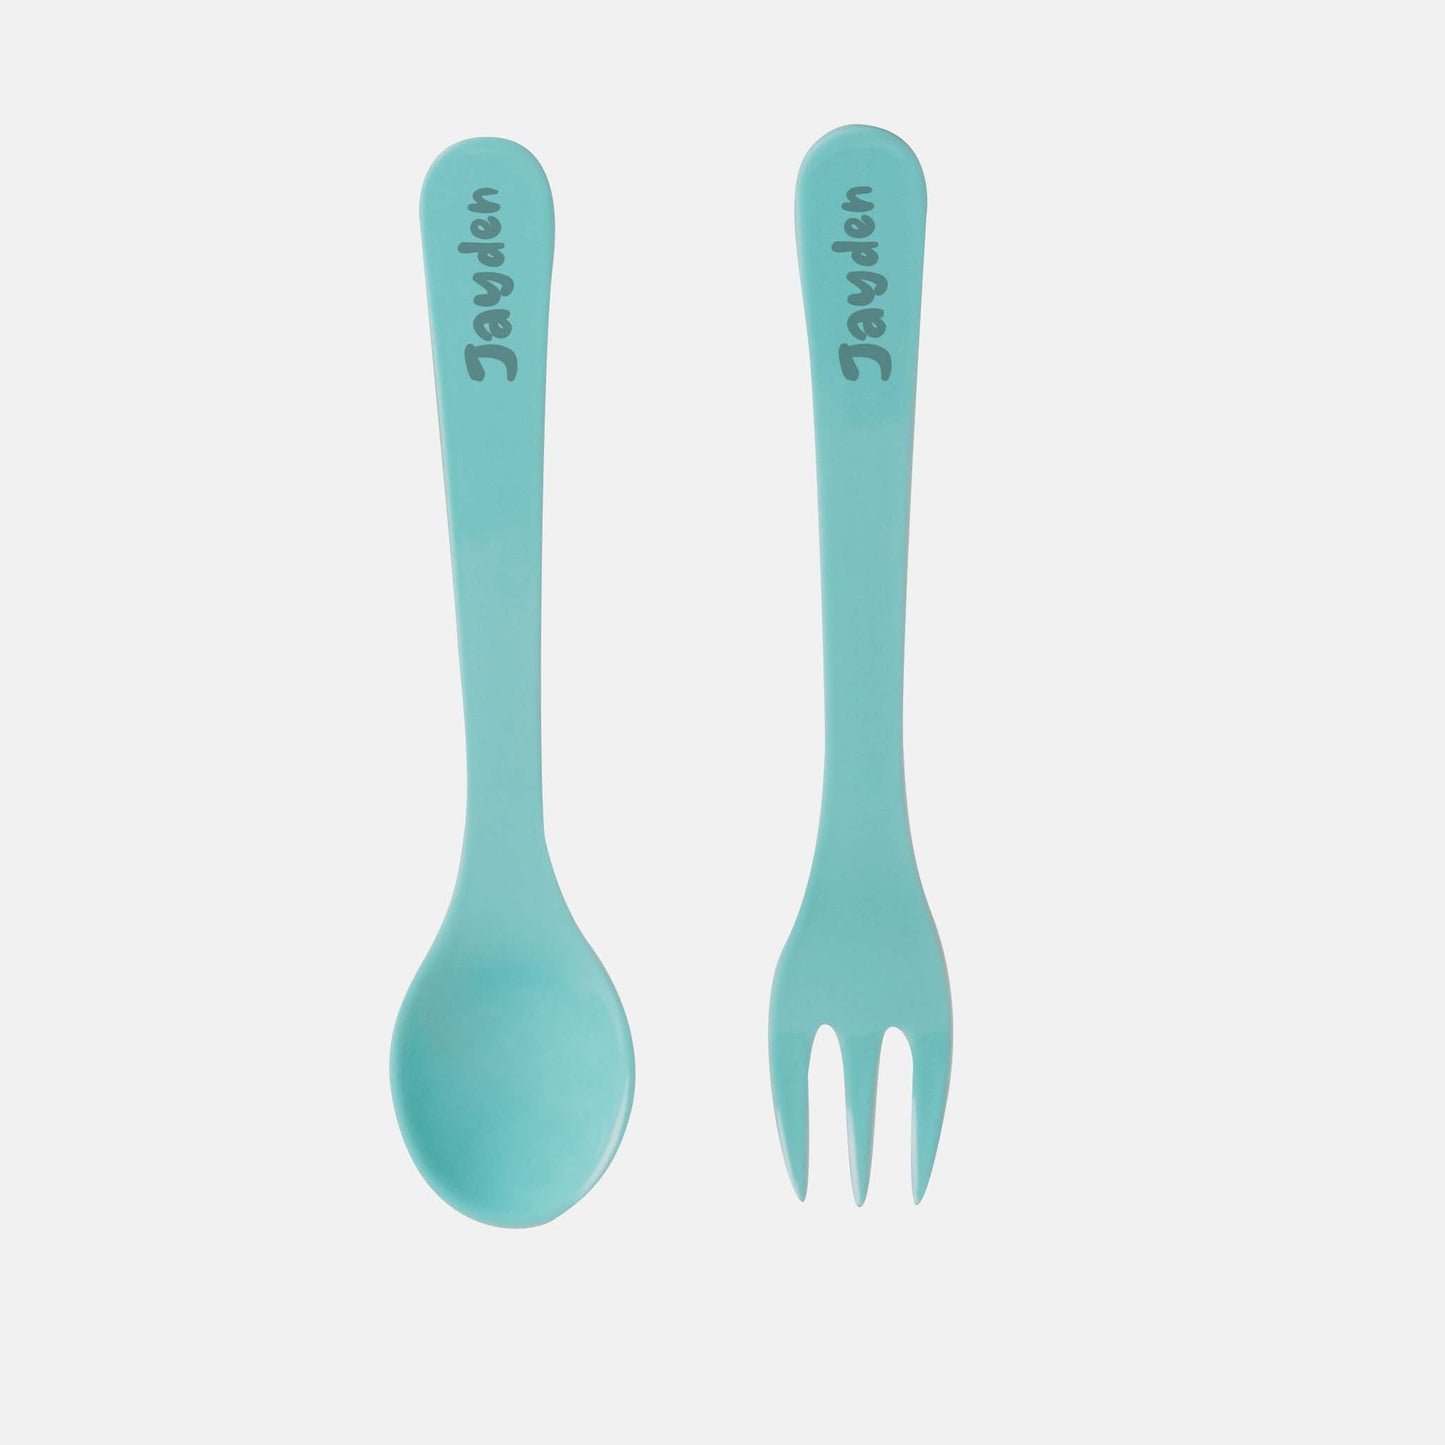 The Plate Story Blue 2 Pcs Personalised Cutlery Set